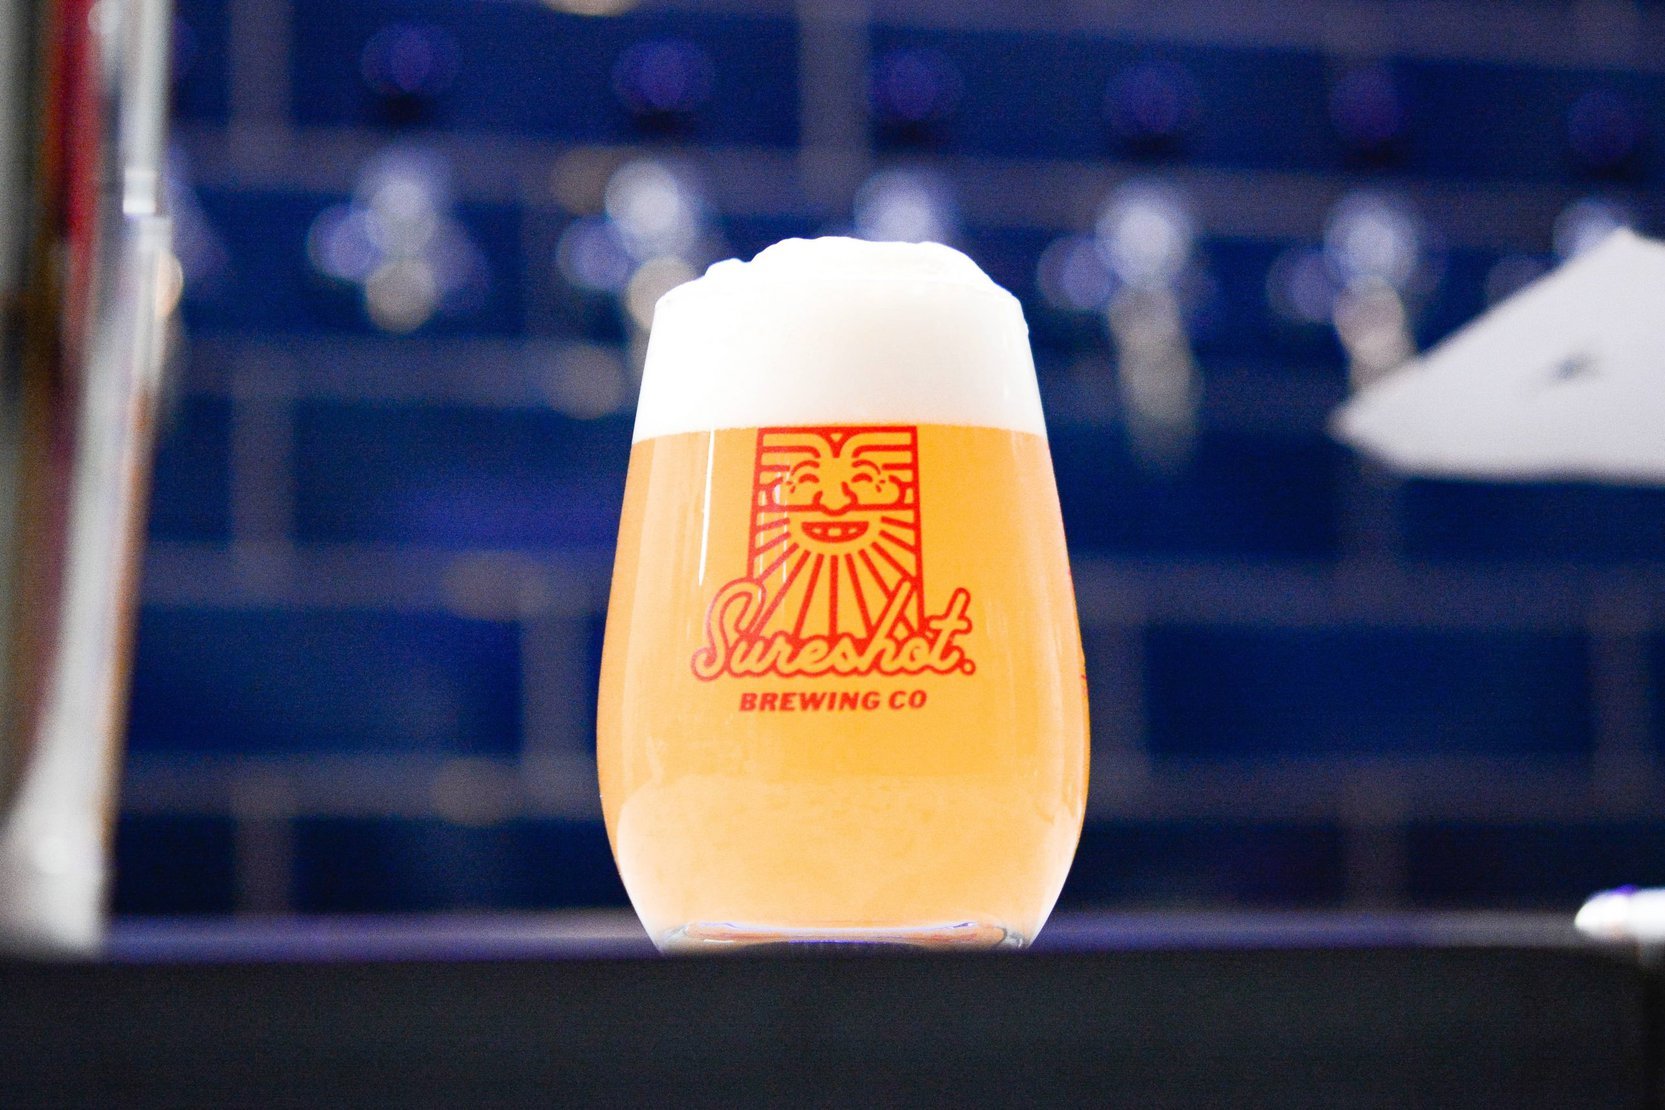 Taproom glass from Sureshot Brewing